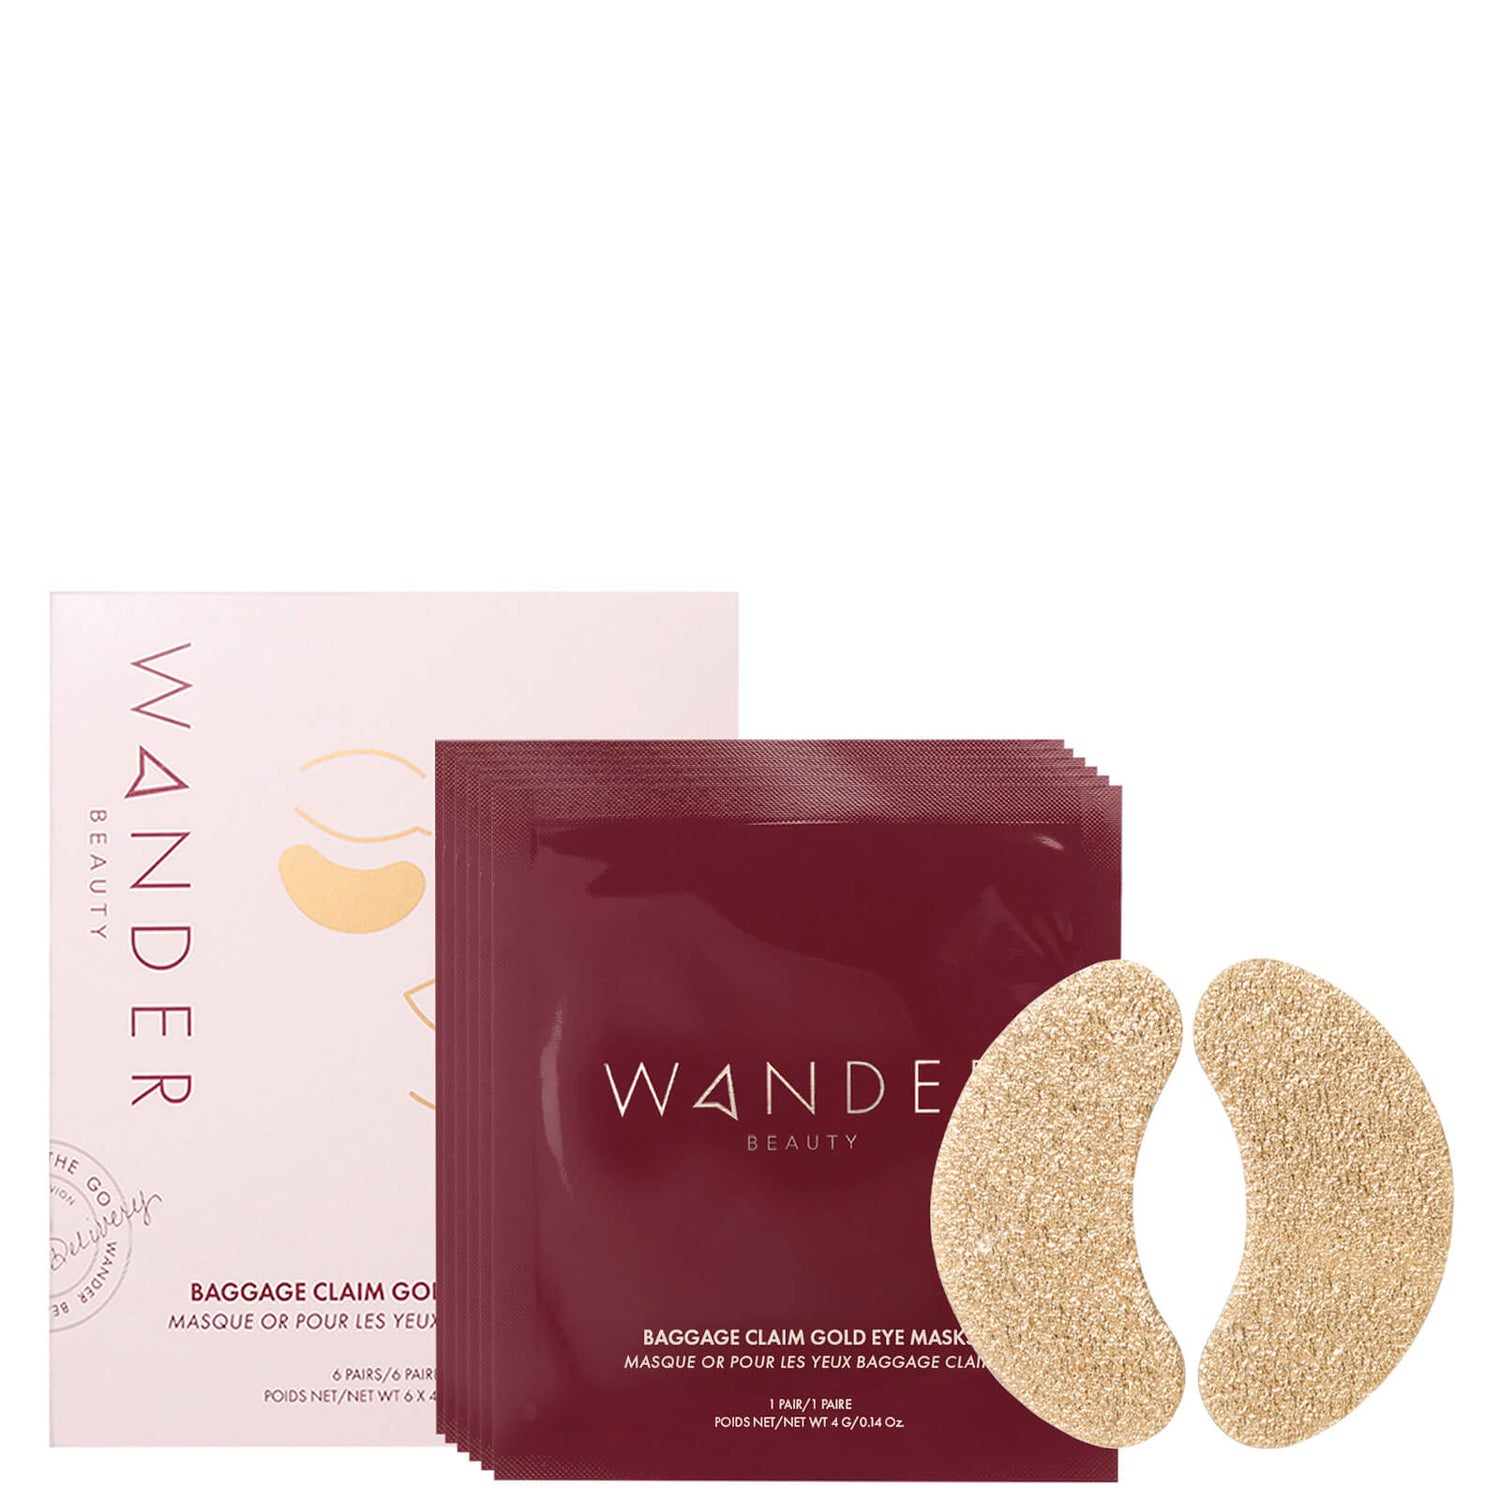 Marchito genio Sotavento Wander Beauty Baggage Claim Gold Eye Masks - Gold (6 pair) - Dermstore